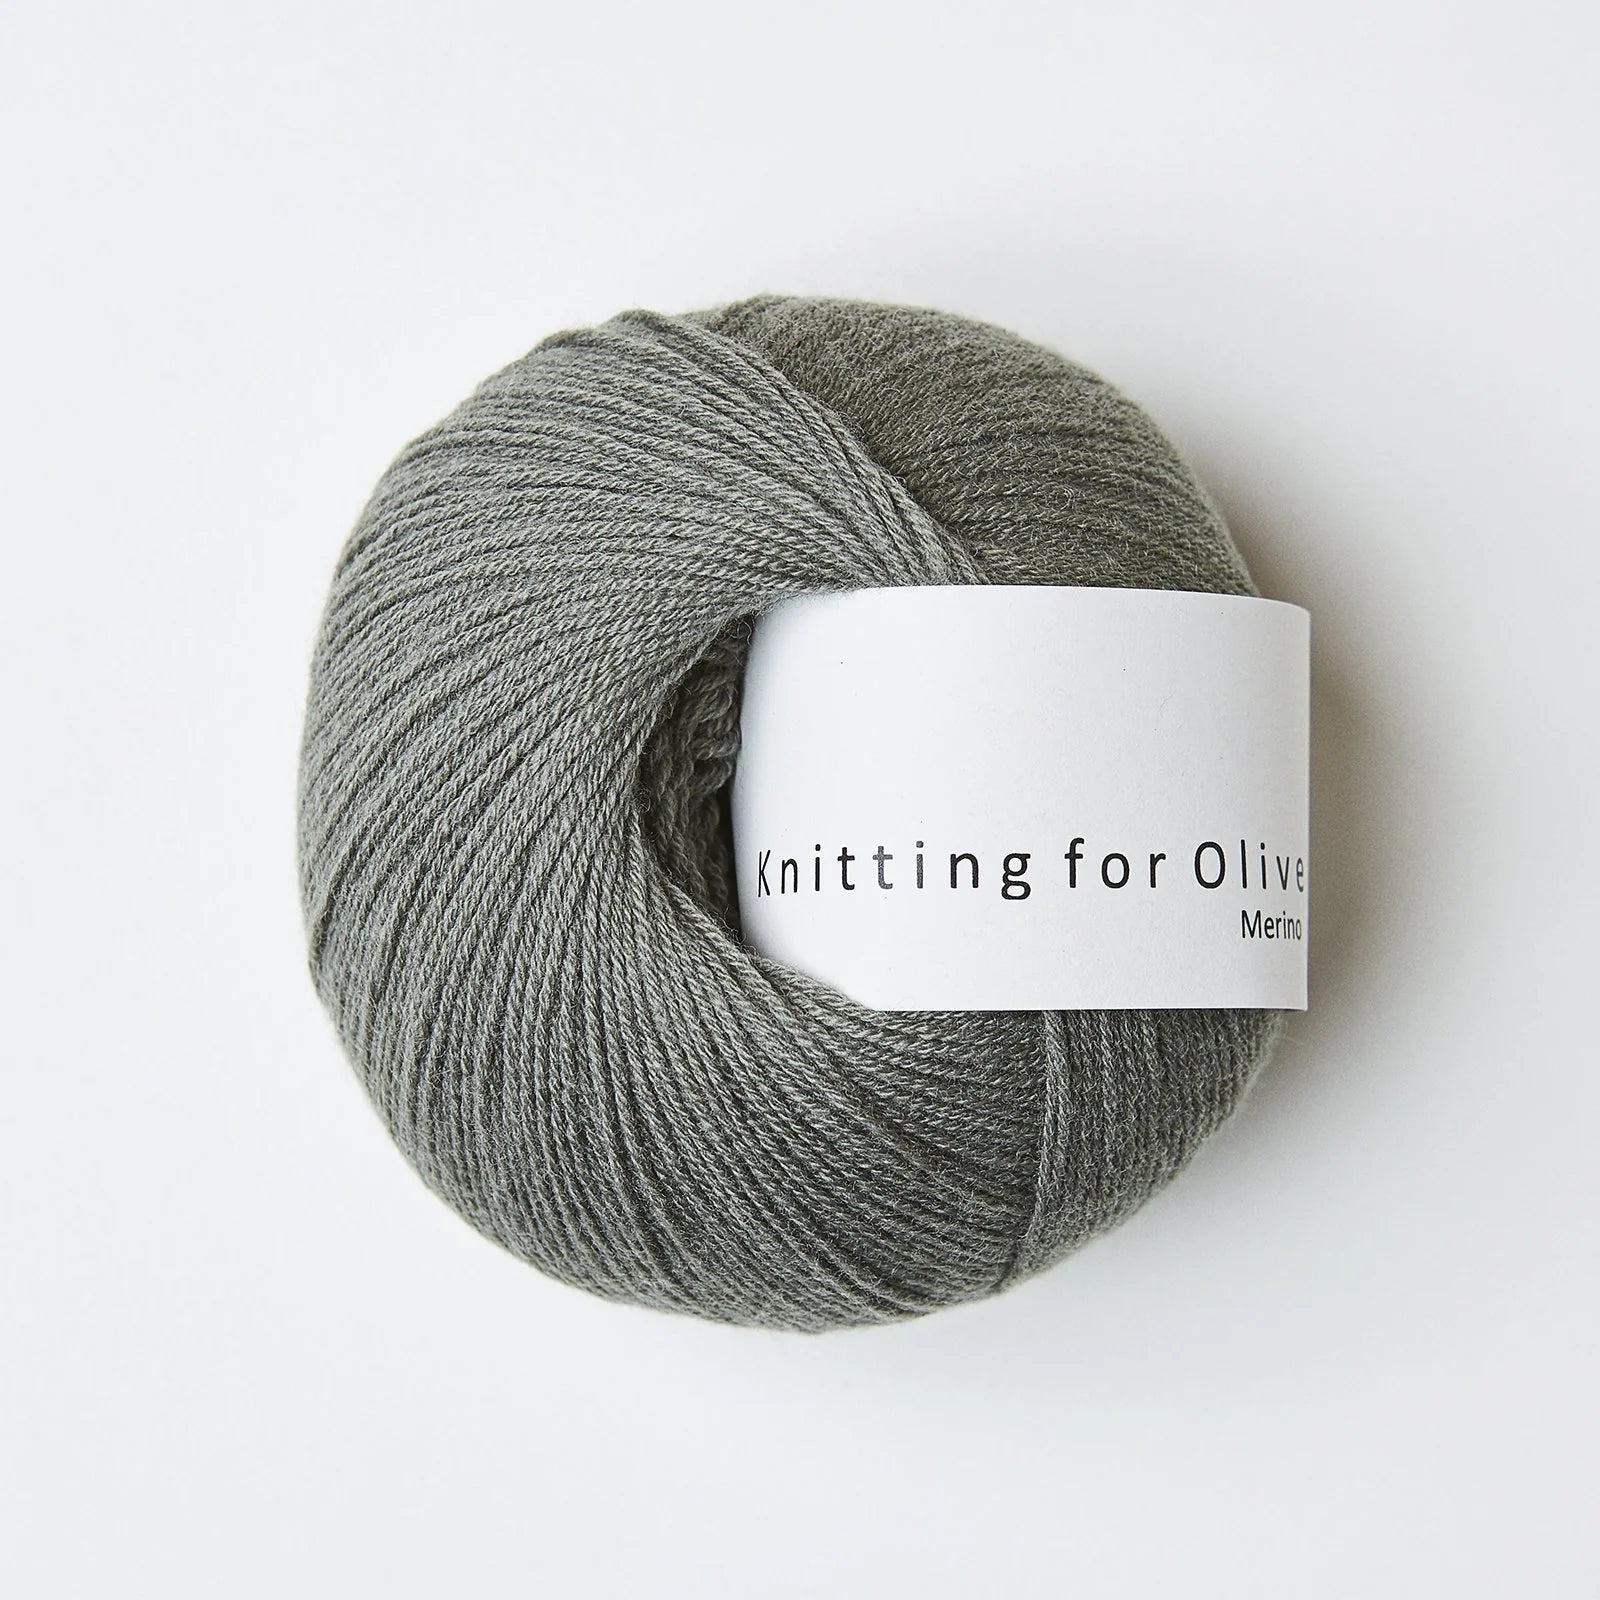 Knitting for Olive Merino - Knitting for Olive - Dusty Sea Green - The Little Yarn Store